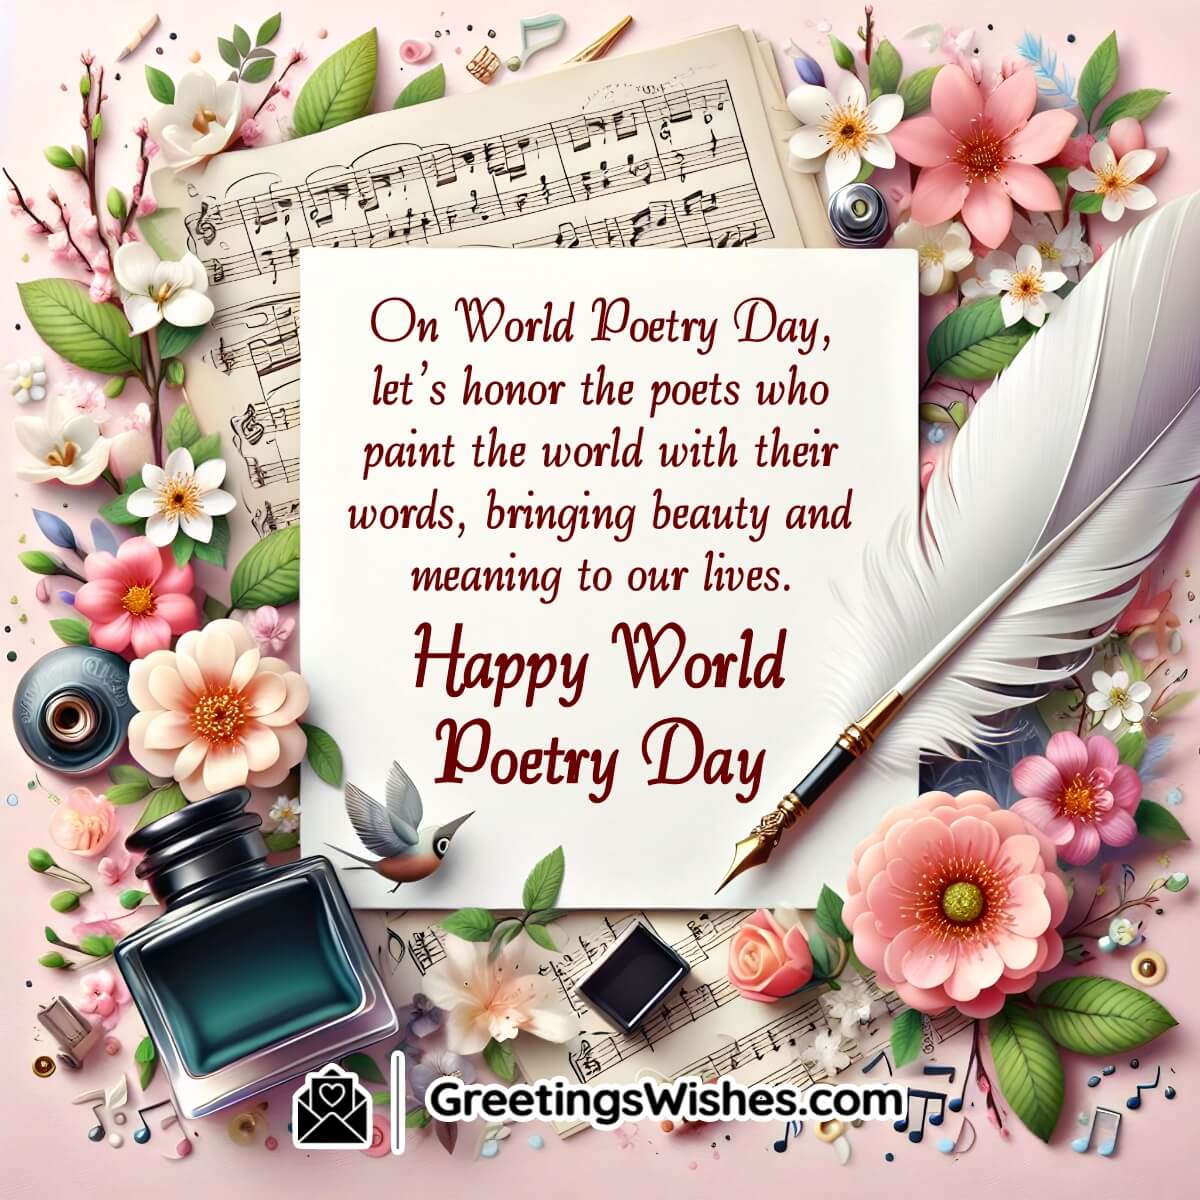 World Poetry Day Messages